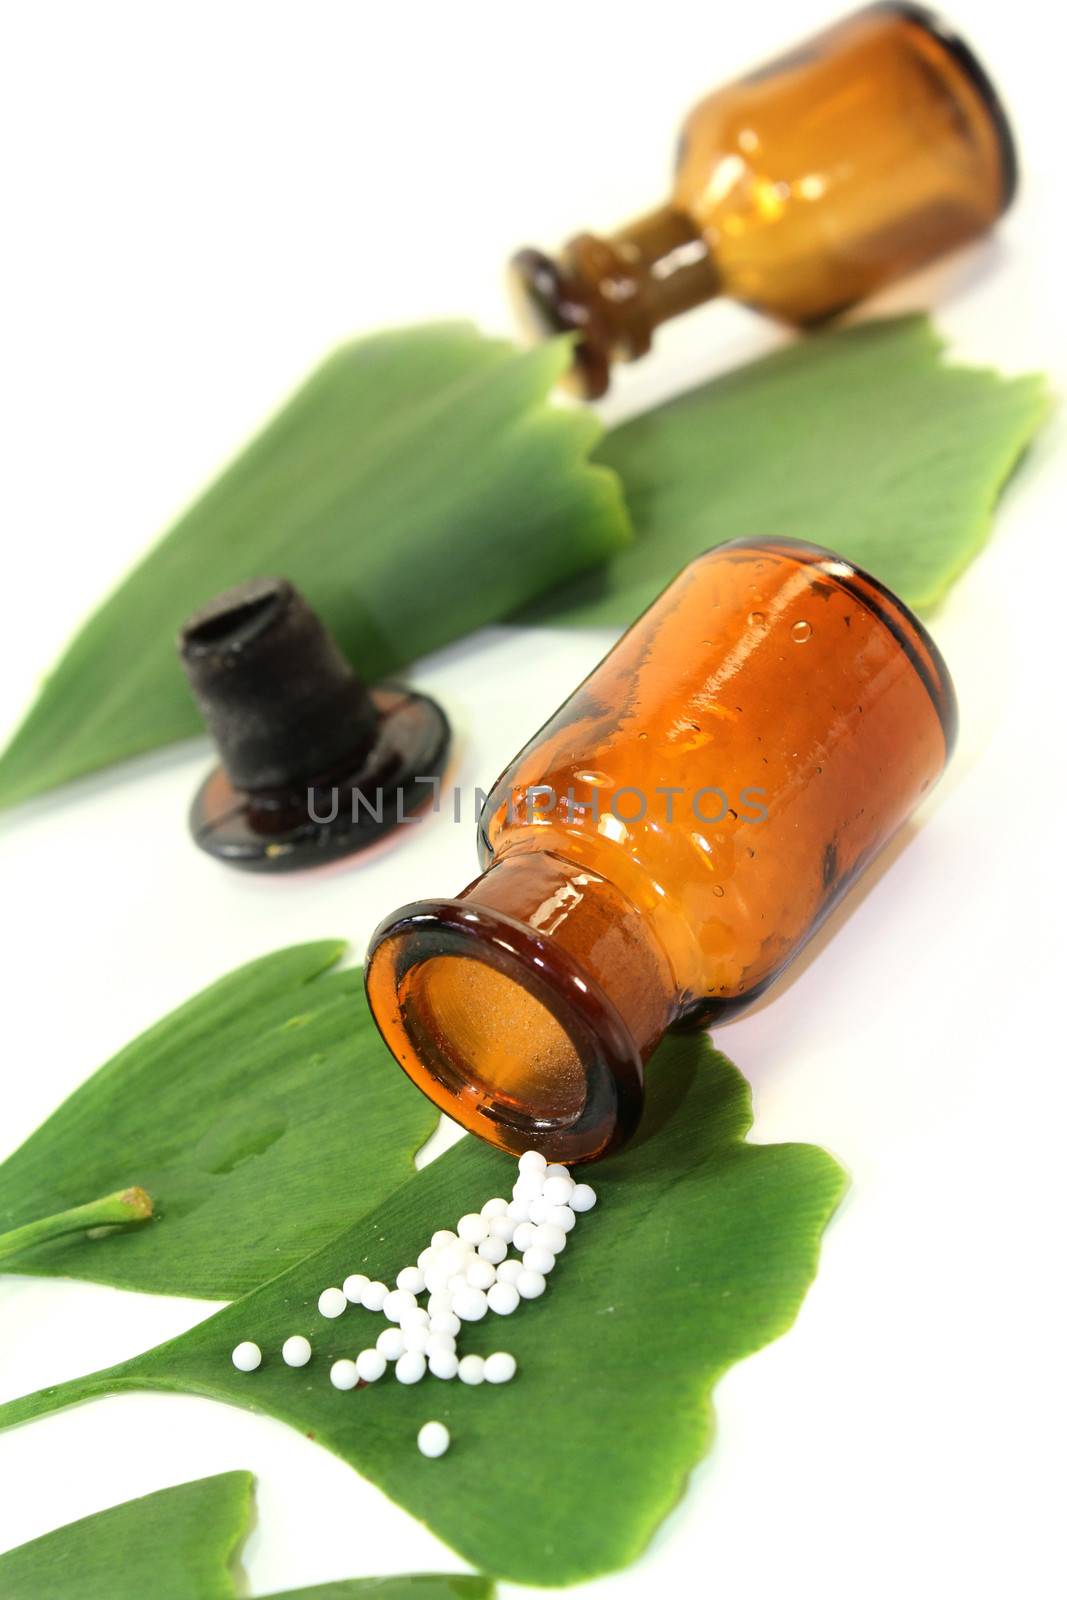 Ginkgo leaves with pharmacists bottle against white background